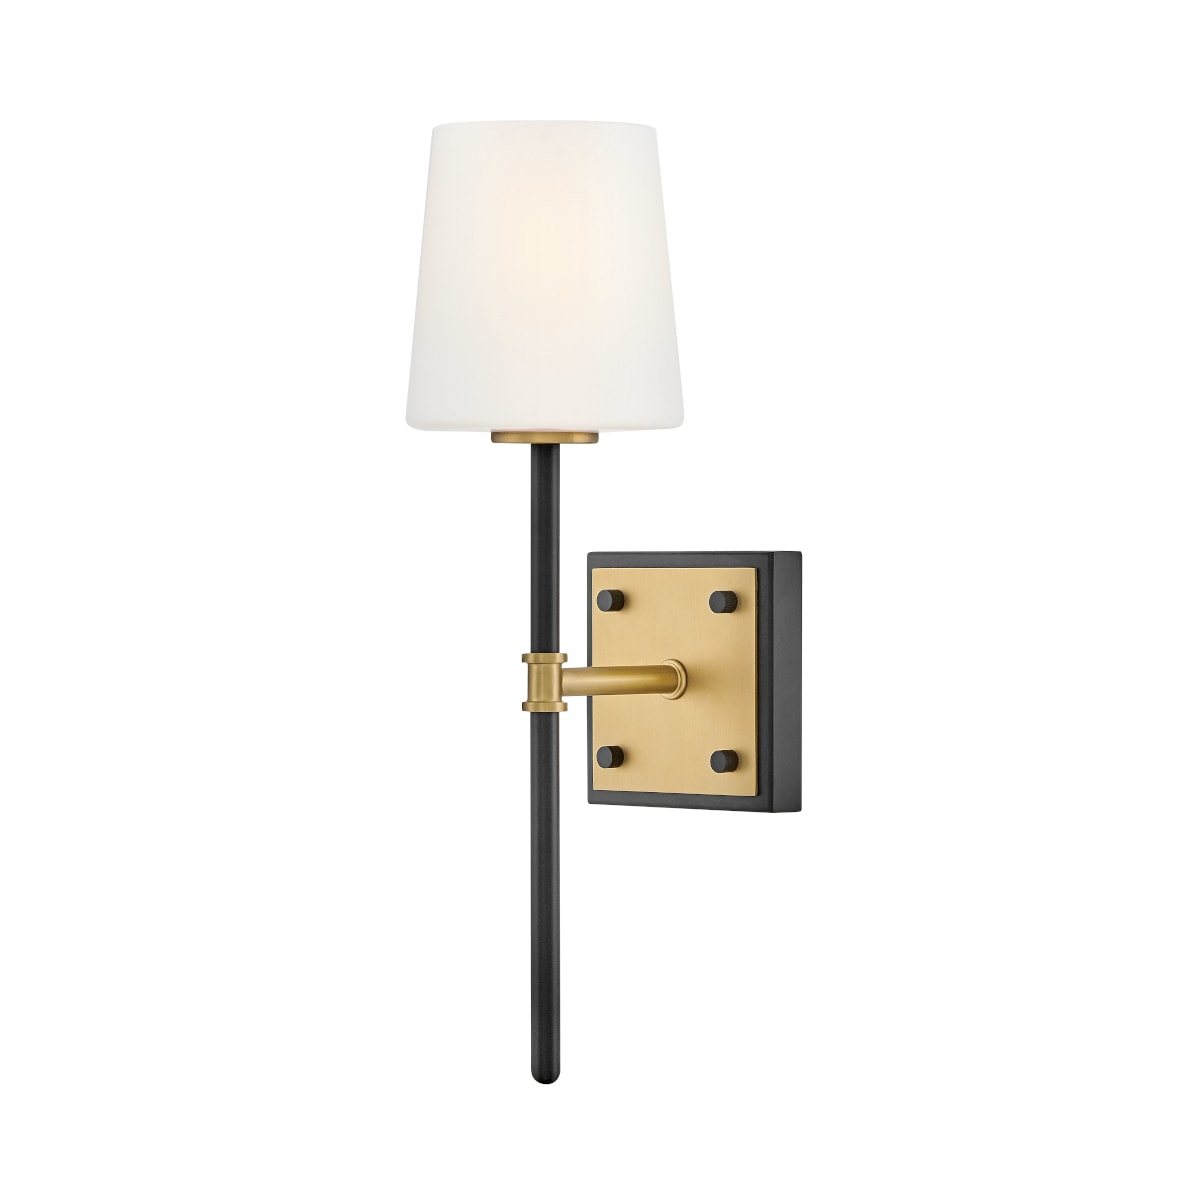 Product image of Saunders Black Wall Light with Brass Details and Glass Shade